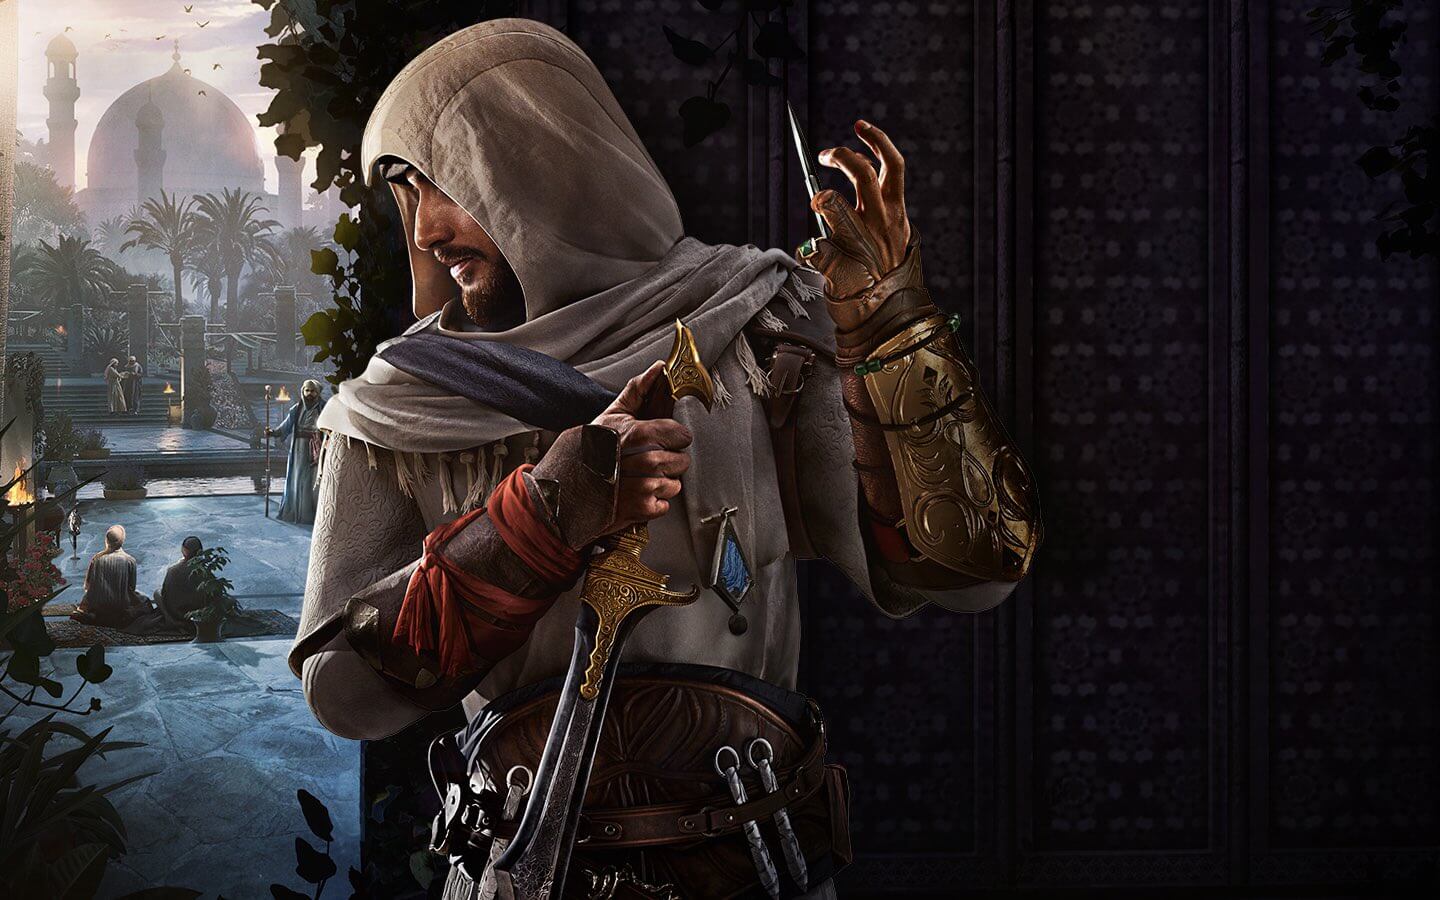 Assassin's Creed Mirage Gameplay and Impressions 